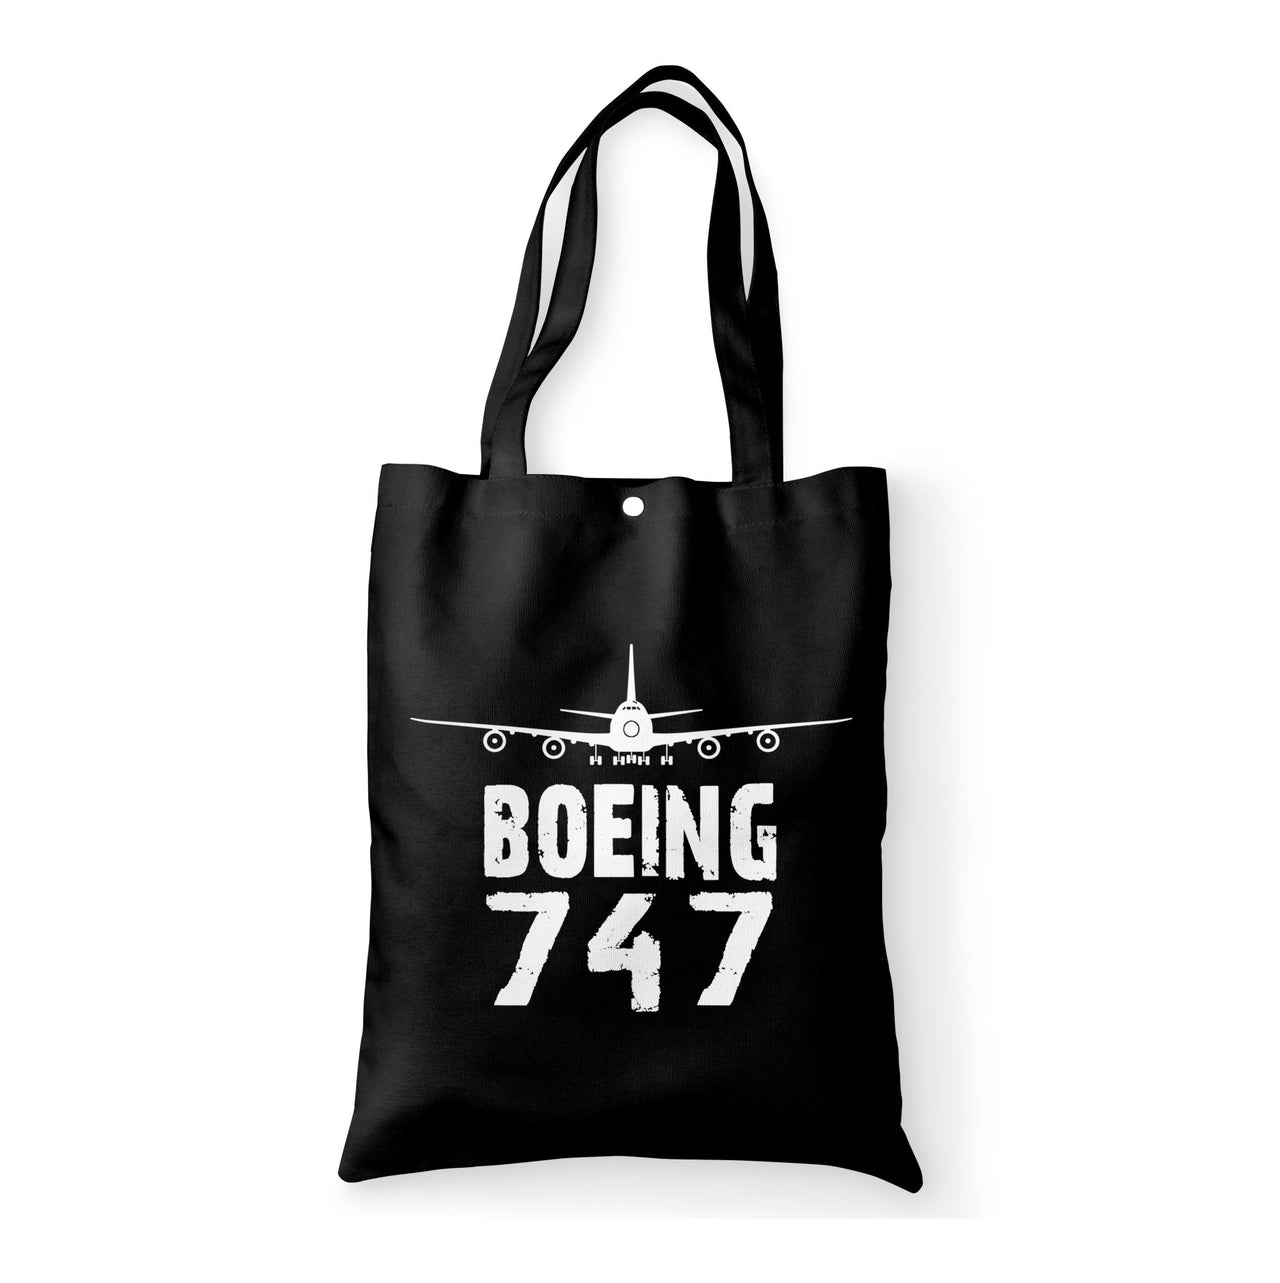 Boeing 747 & Plane Designed Tote Bags